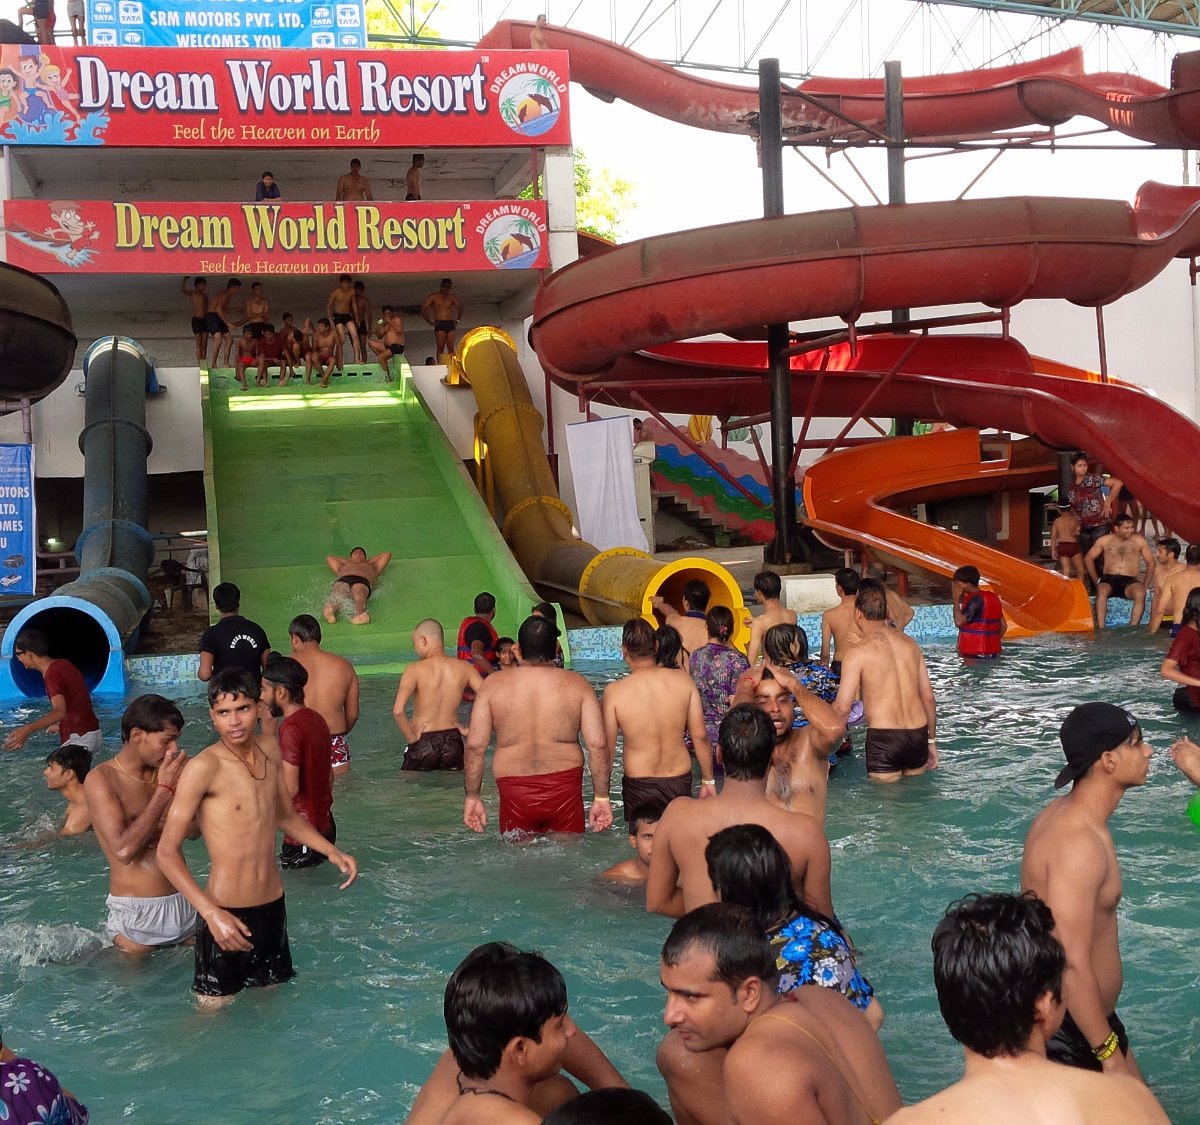 Dream World - the state-of-the-art water theme park is situated